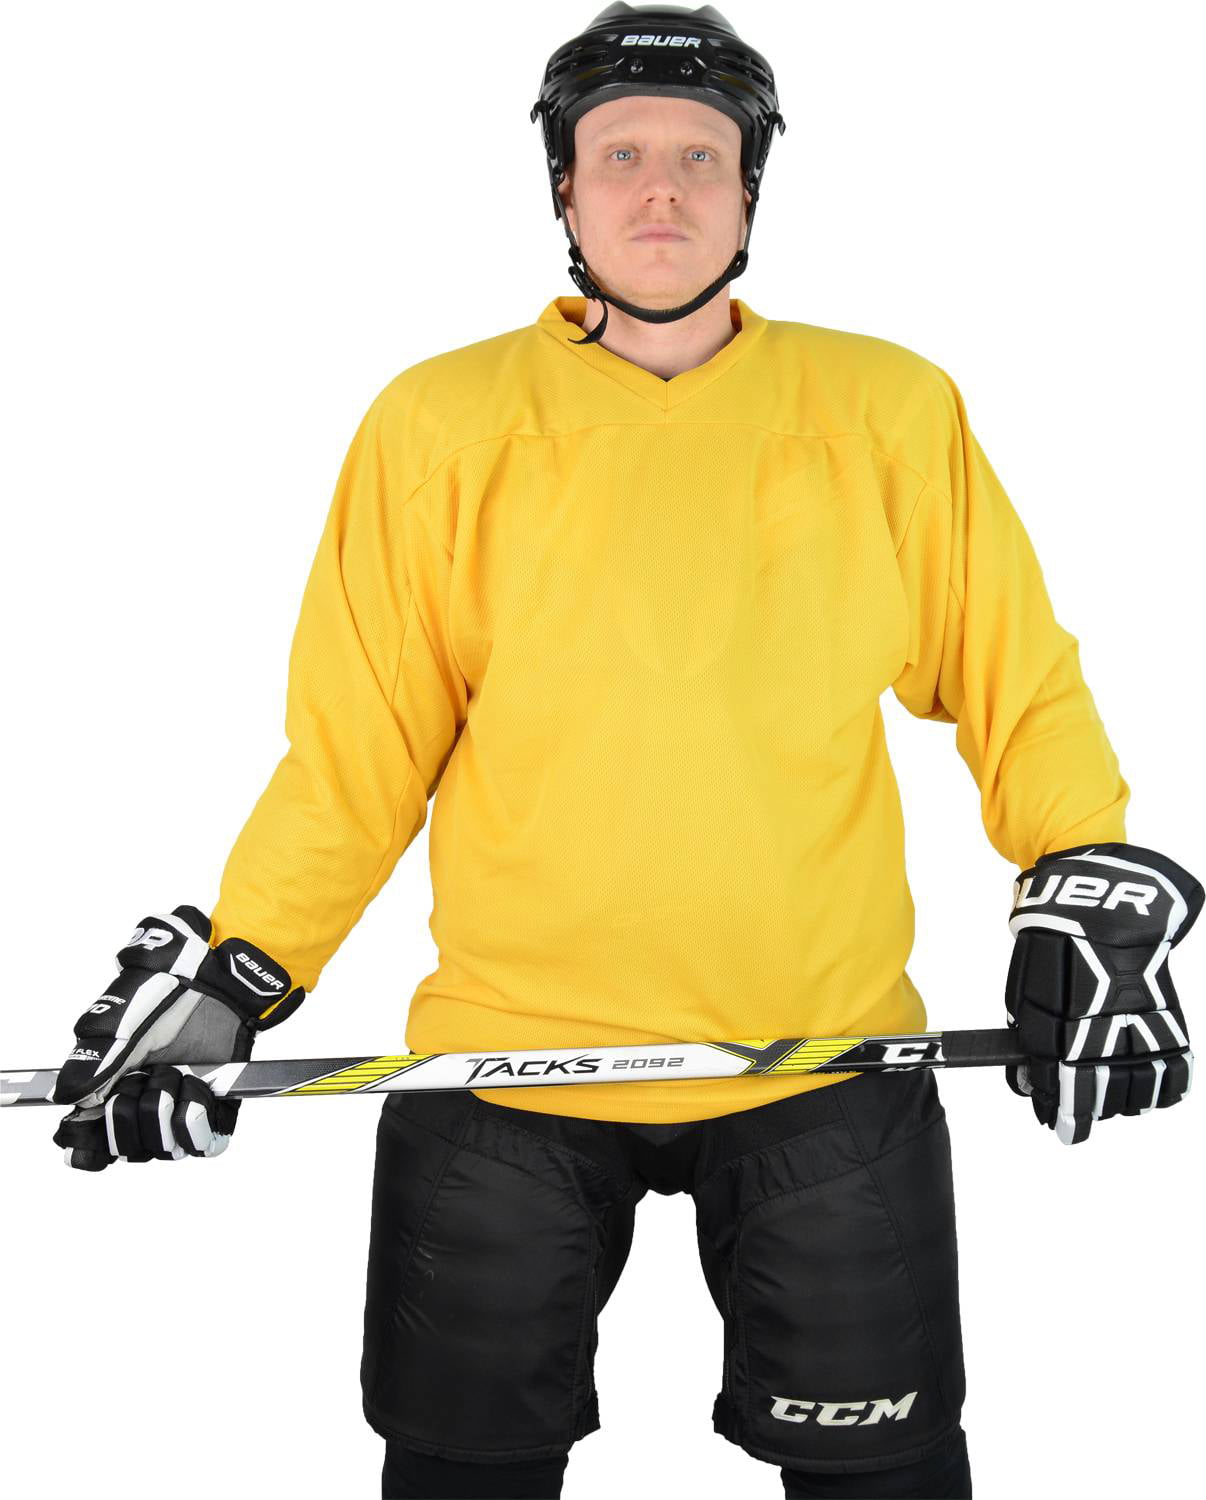 Sports Unlimited Adult Hockey Practice Jersey 